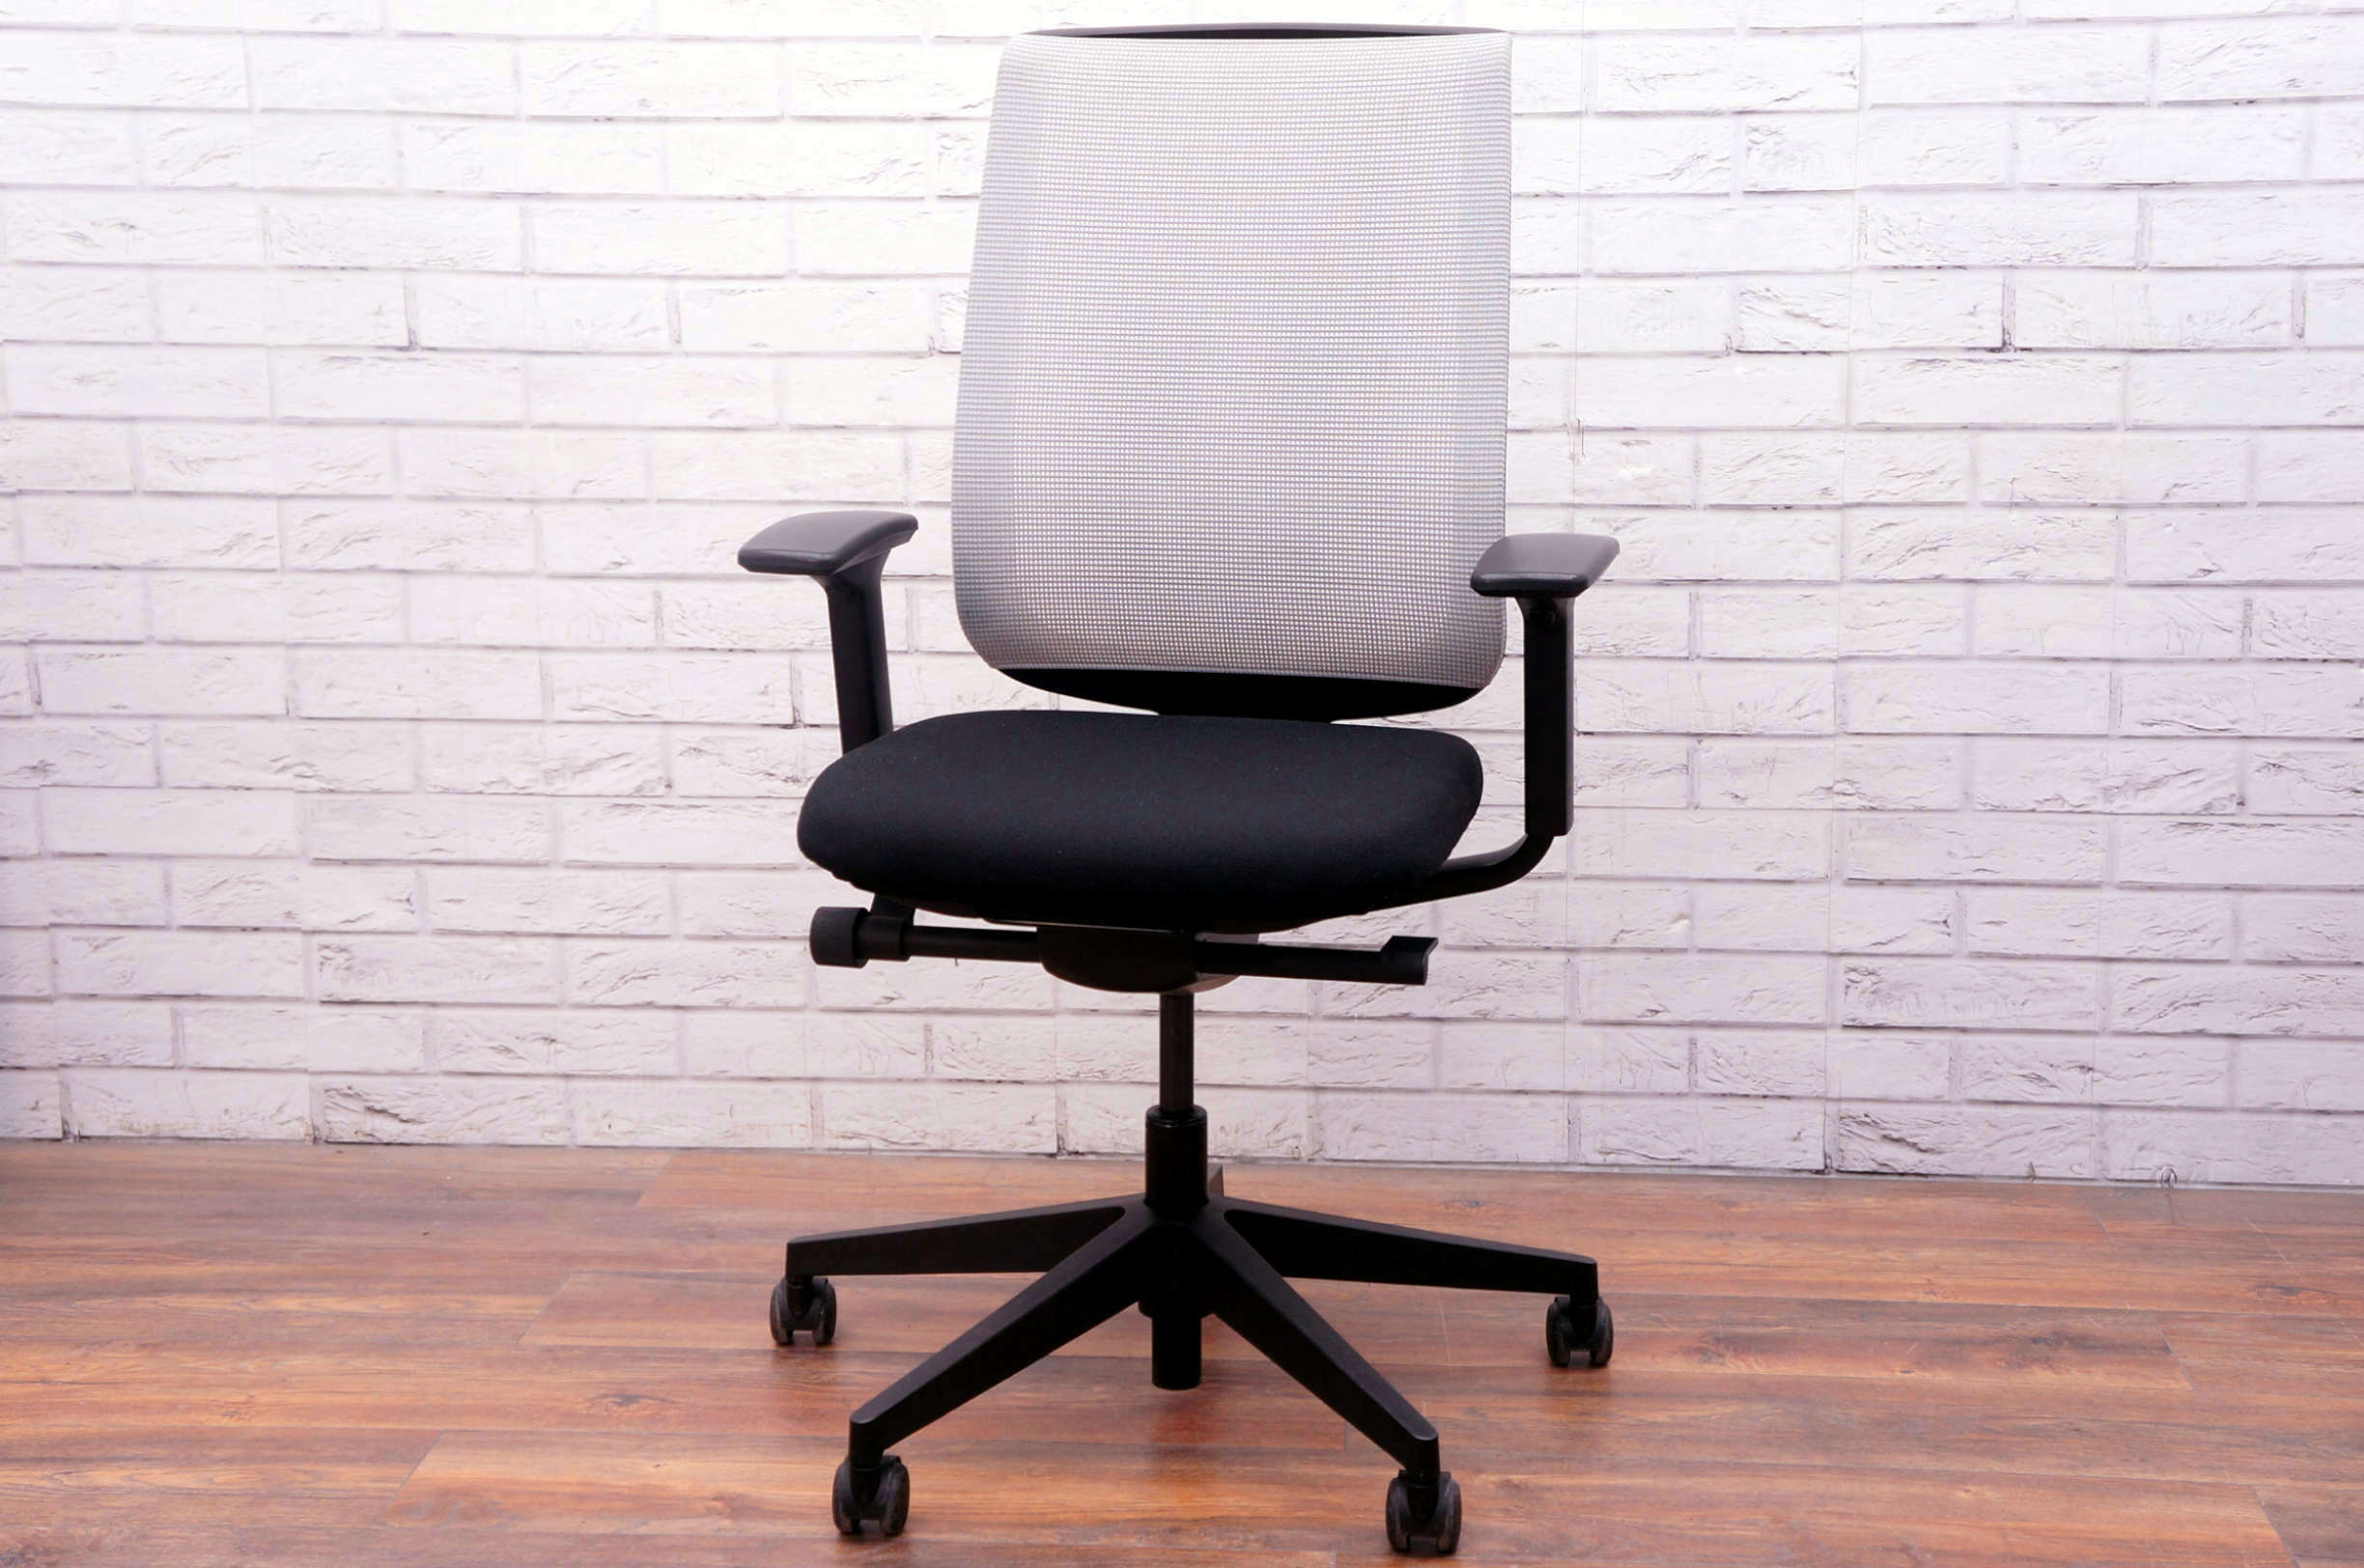 83 Office Steelcase reply chair uk for Office Wallpaper